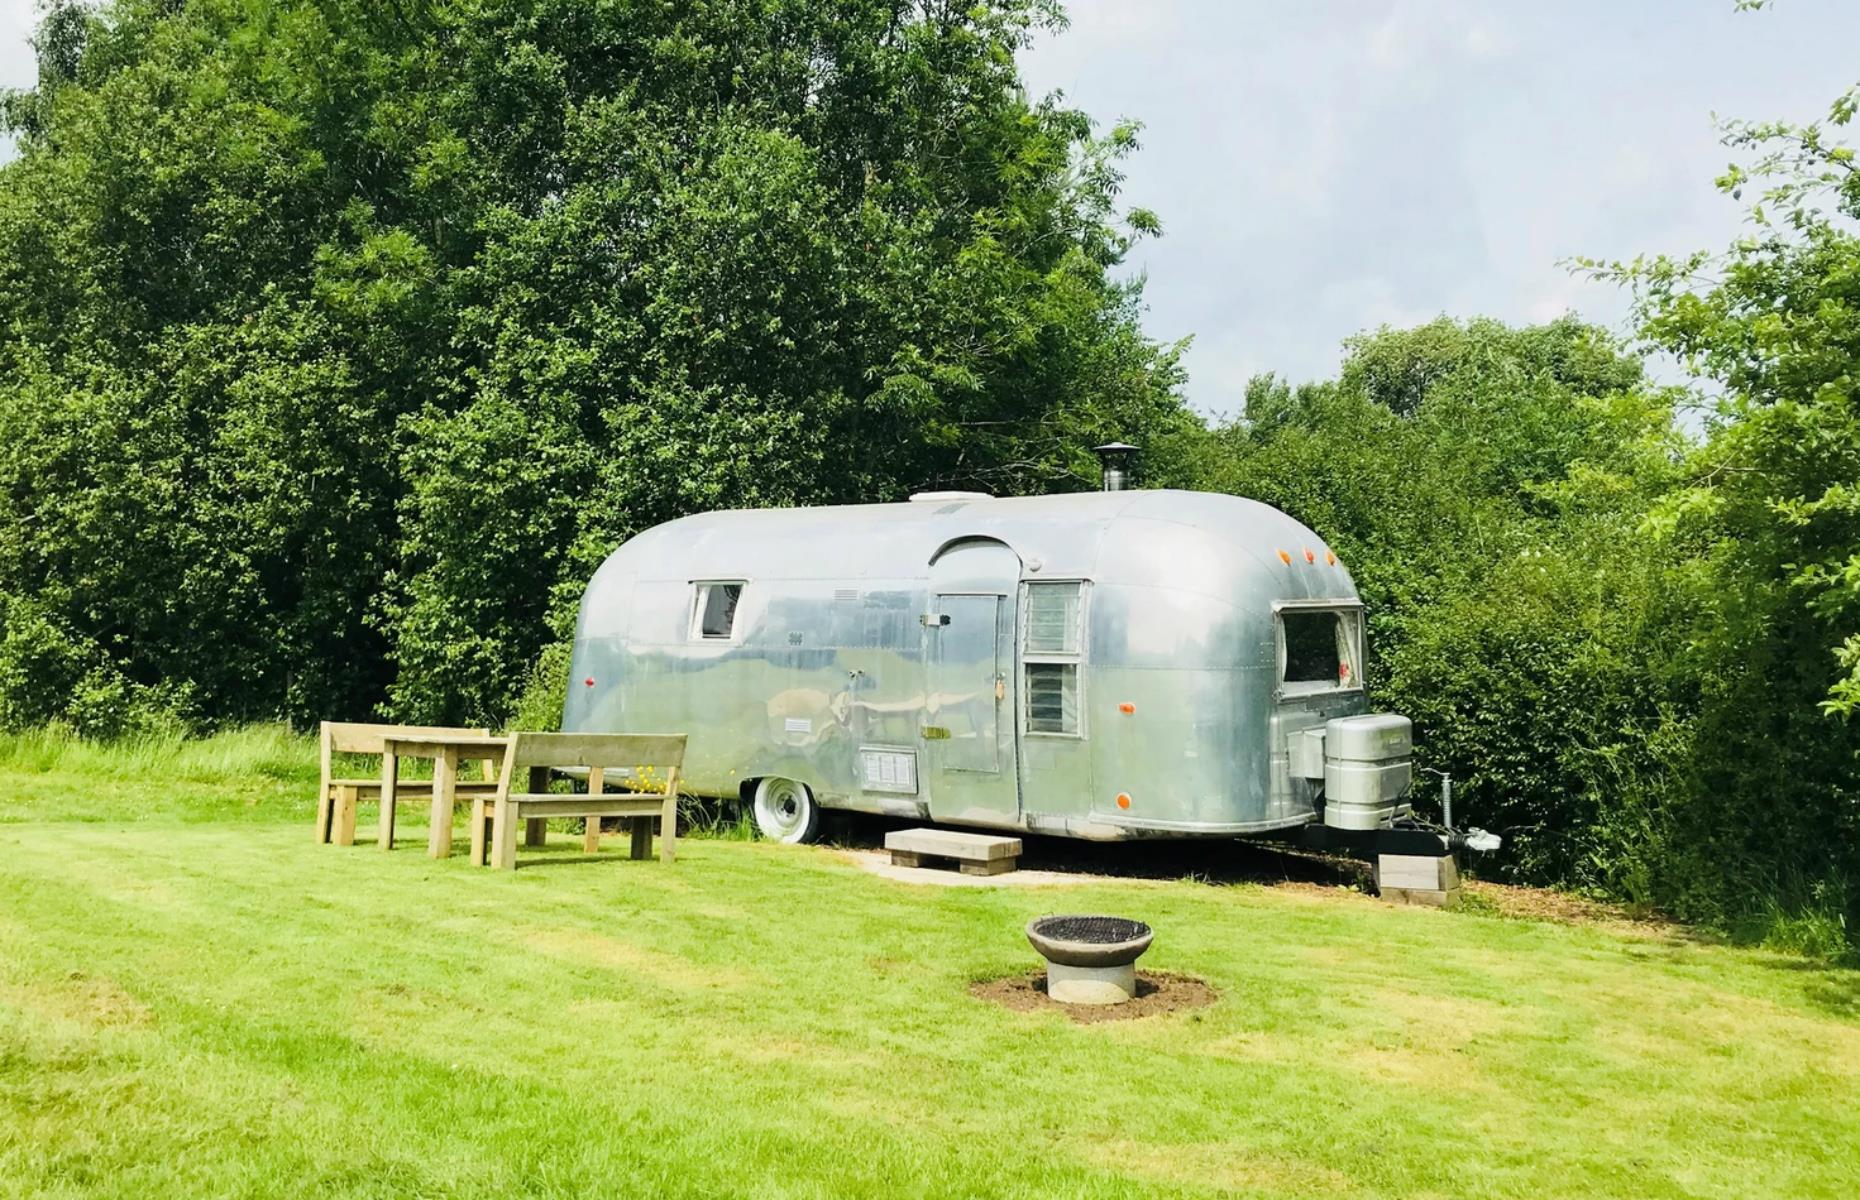 <p>Cotswold Camping benefits from an idyllic location: the site is built on the grounds of a former Norman castle and the moat is still visible. Airstream Ana, an original Silver Bullet Airstream from the 1960s, provides the perfect base. On top of central heating, it even has its own indoor log burner – it is England, after all!</p>